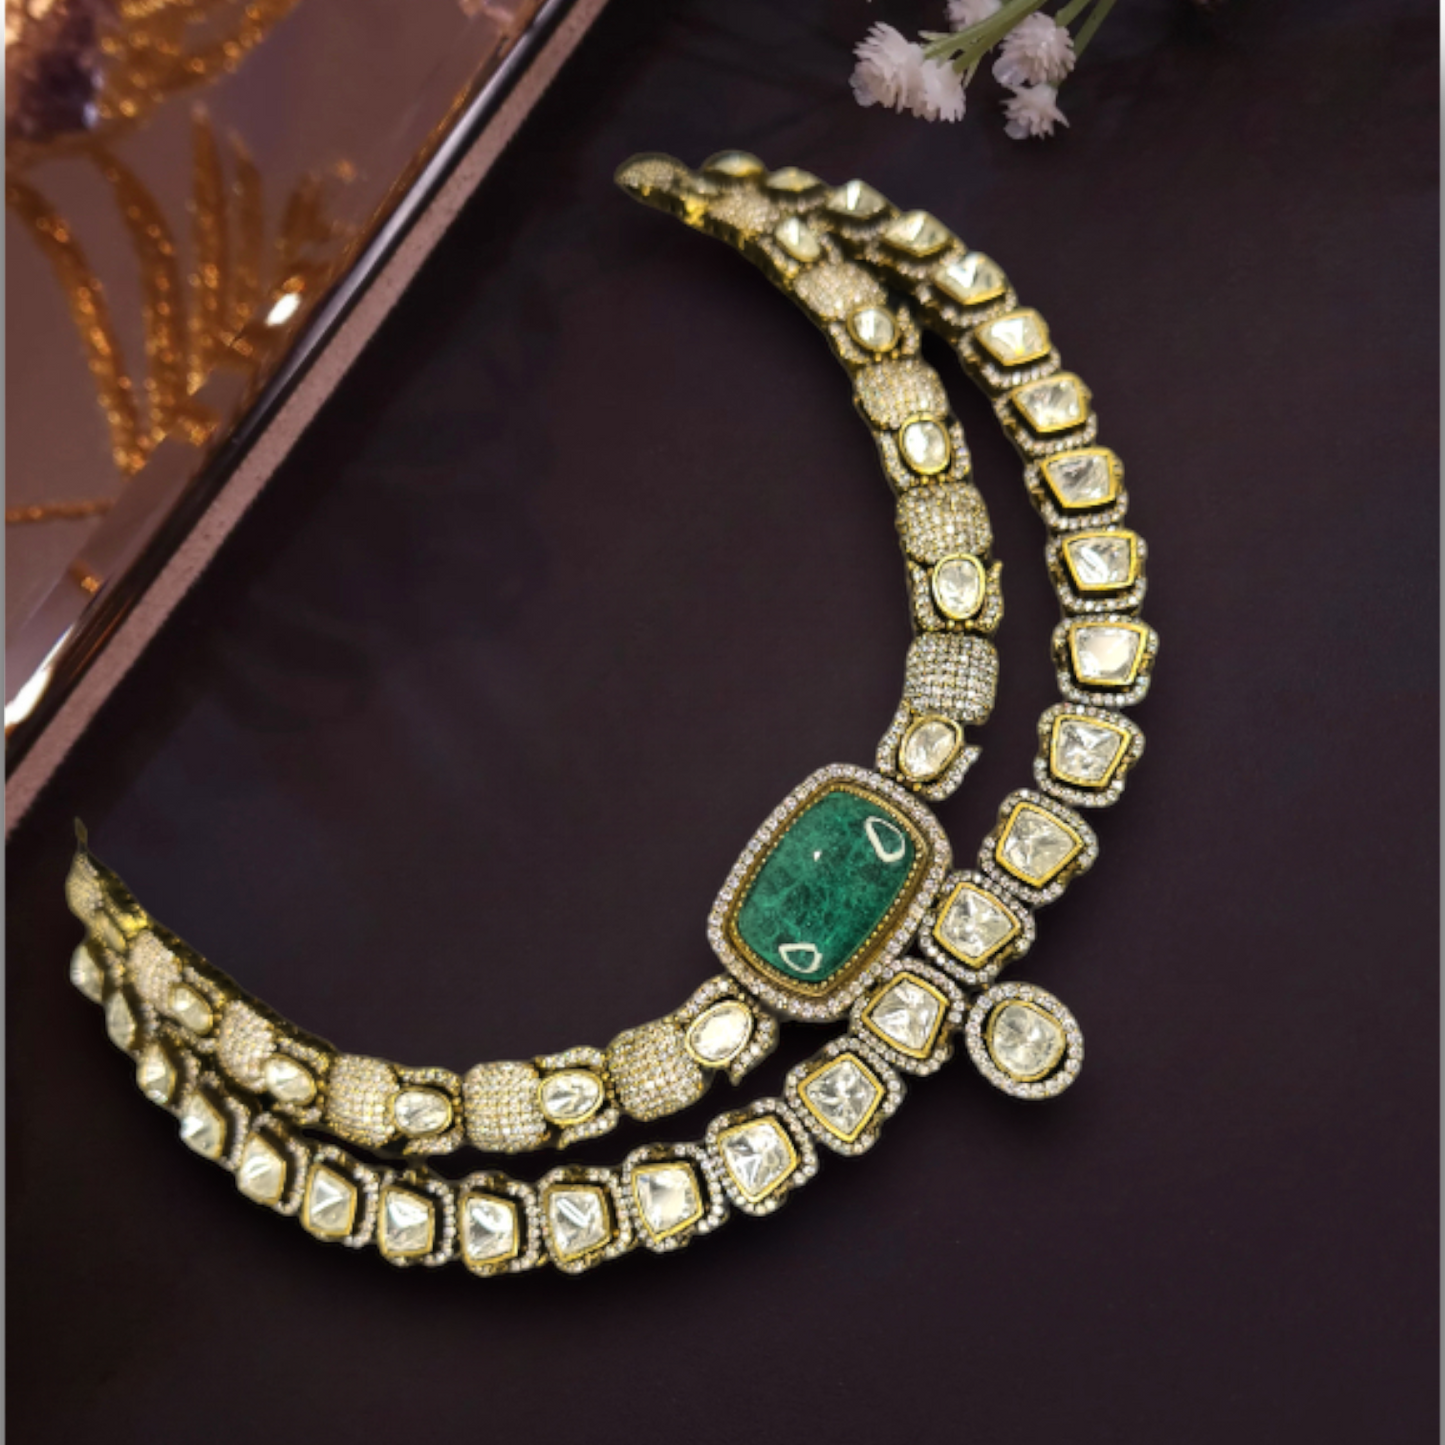 Premium Two-Step Victorian Necklace Set in Mint colour with zircon, and moissanite polki stones, including matching earrings. This Victorian Jewellery is available in a Green colour variant. 